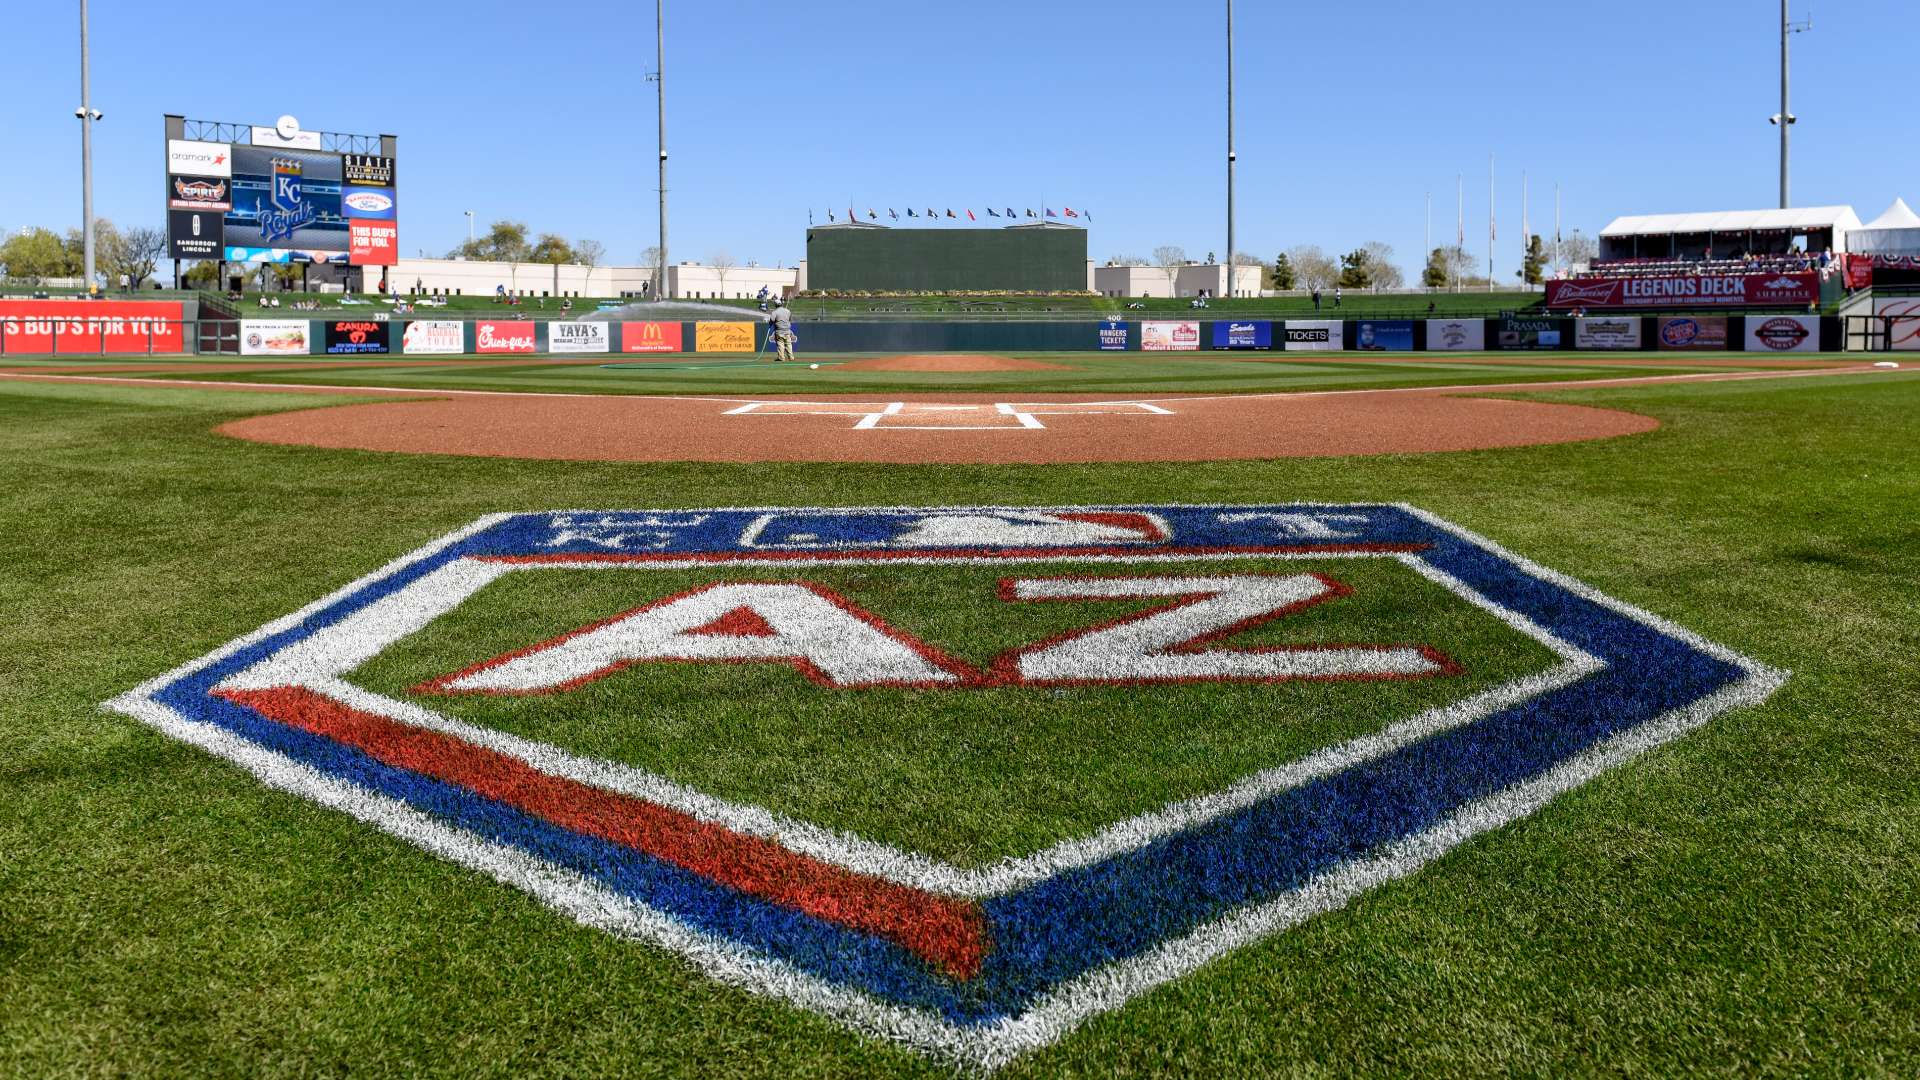 How many innings are MLB spring training games?